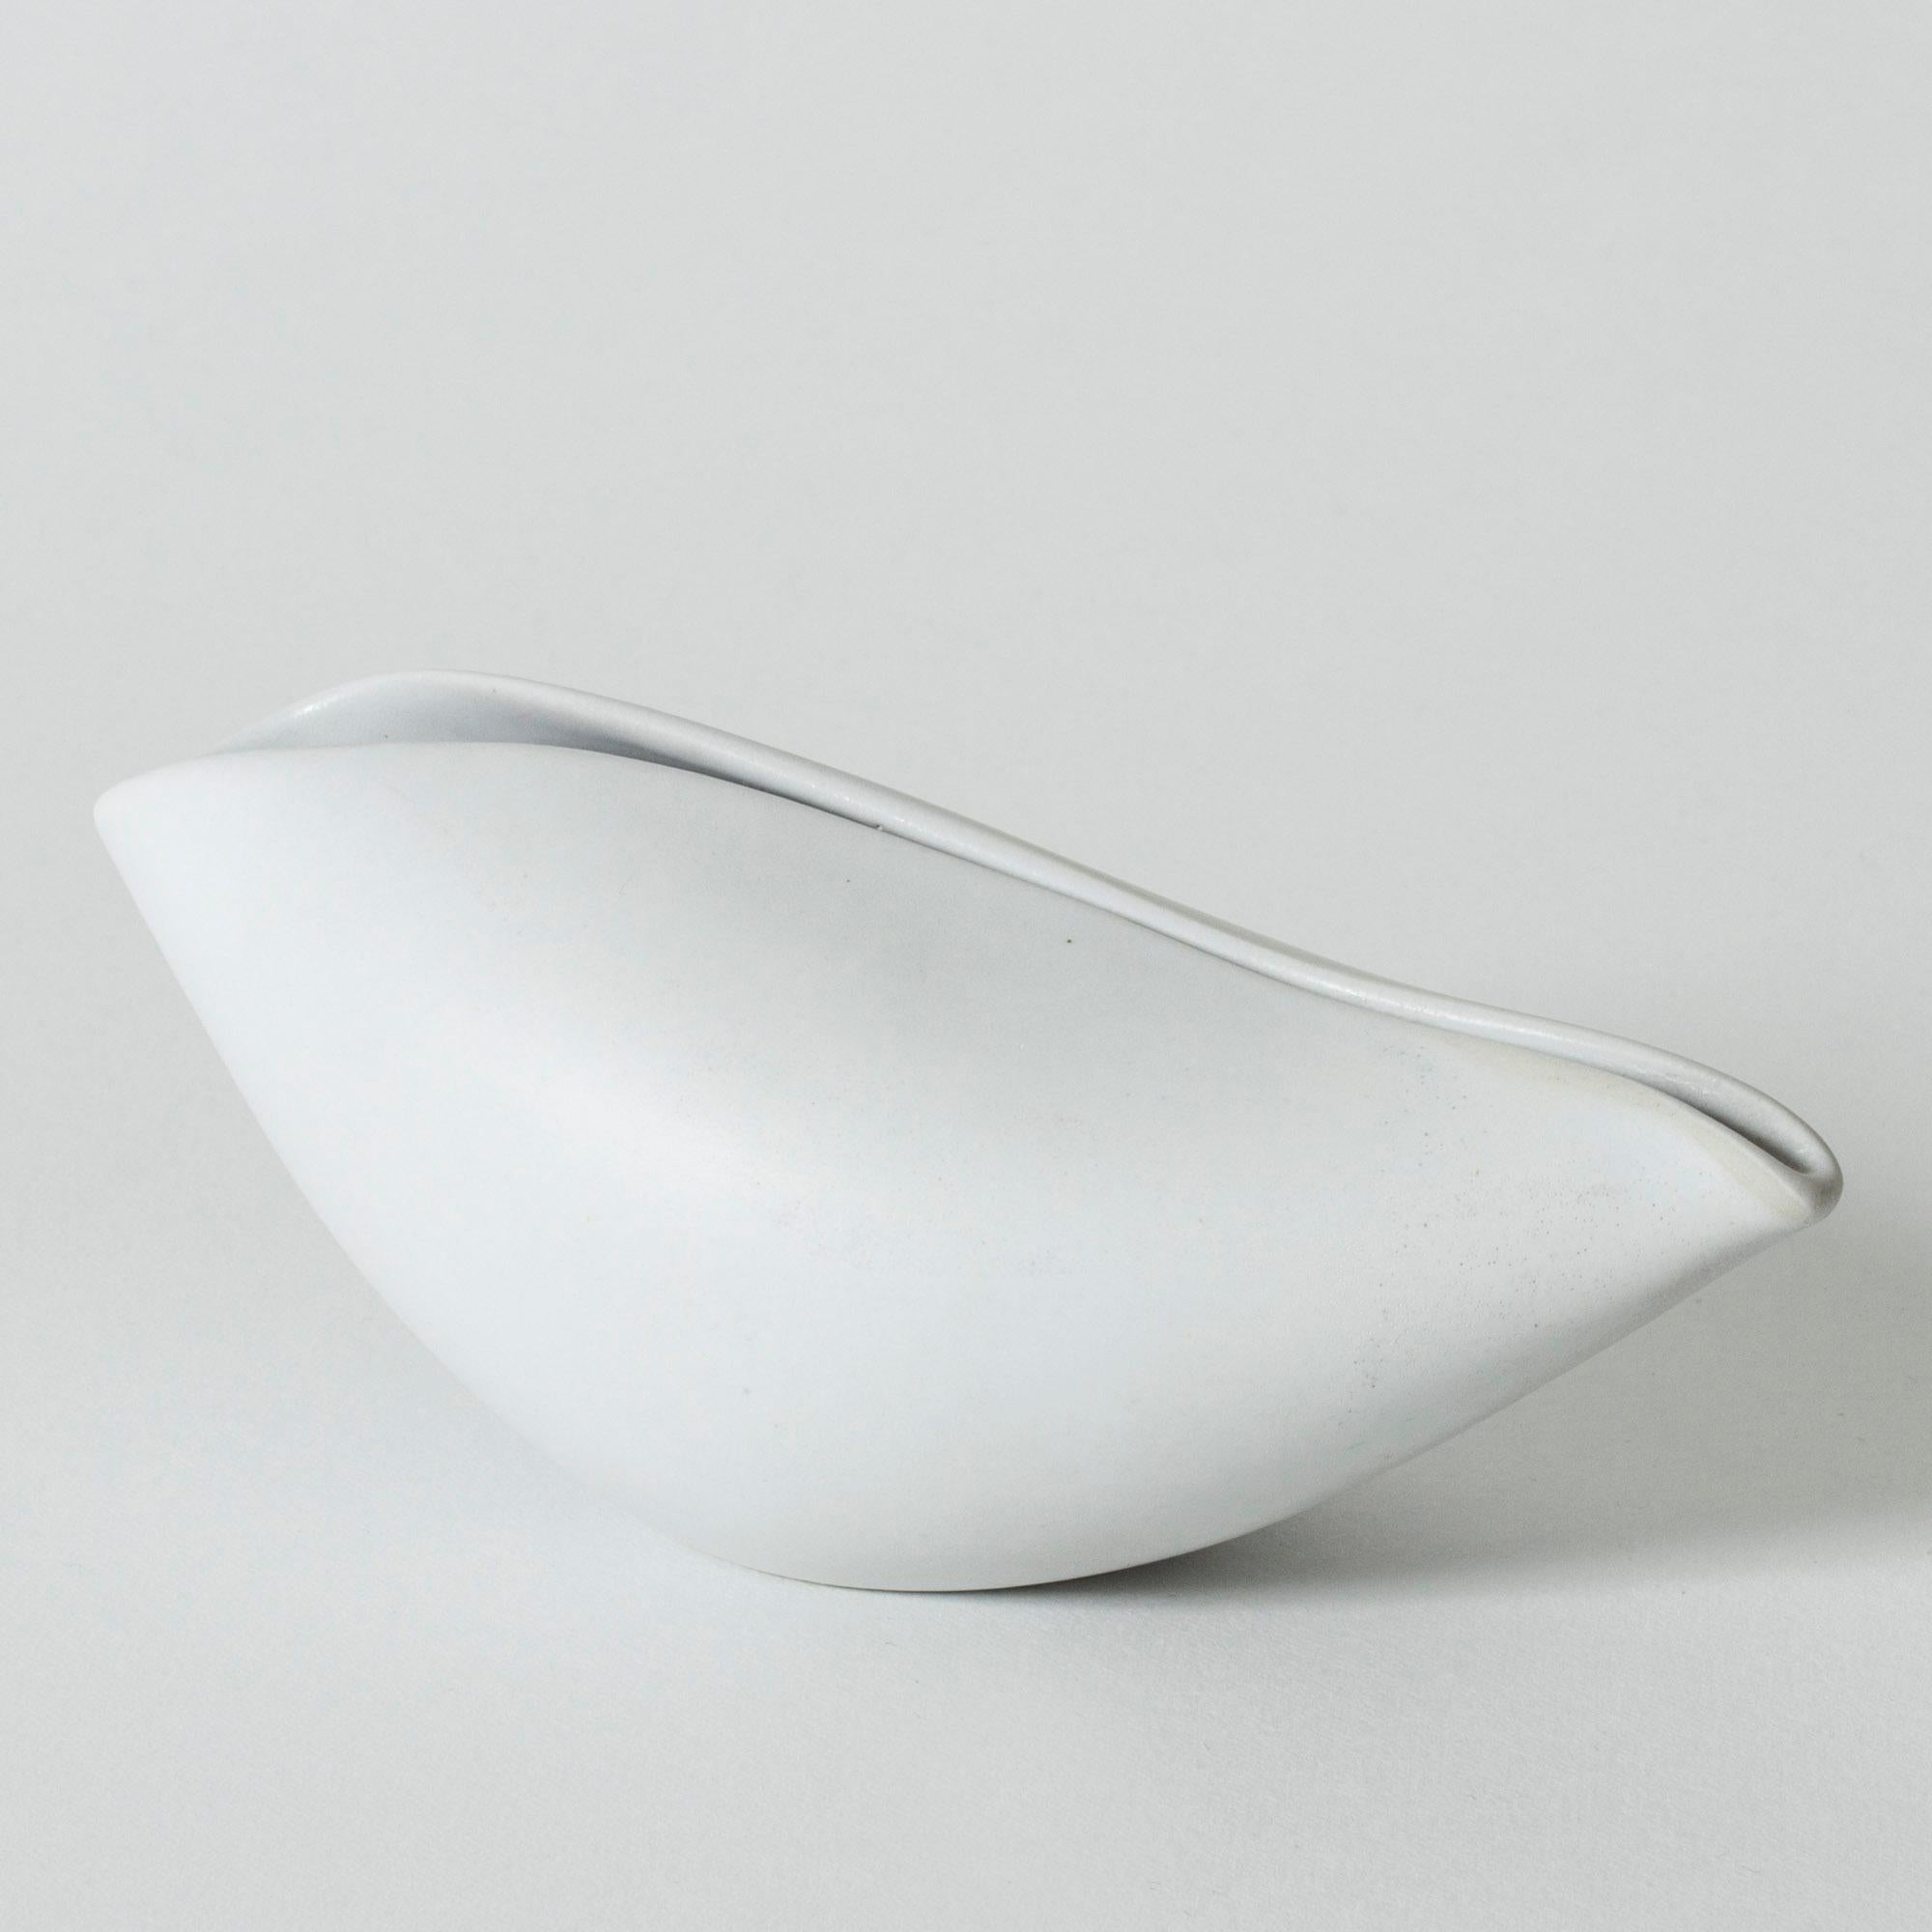 Lovely “Veckla” bowl by Stig Lindberg, in smooth, white carrara stoneware. Folded, oval form.